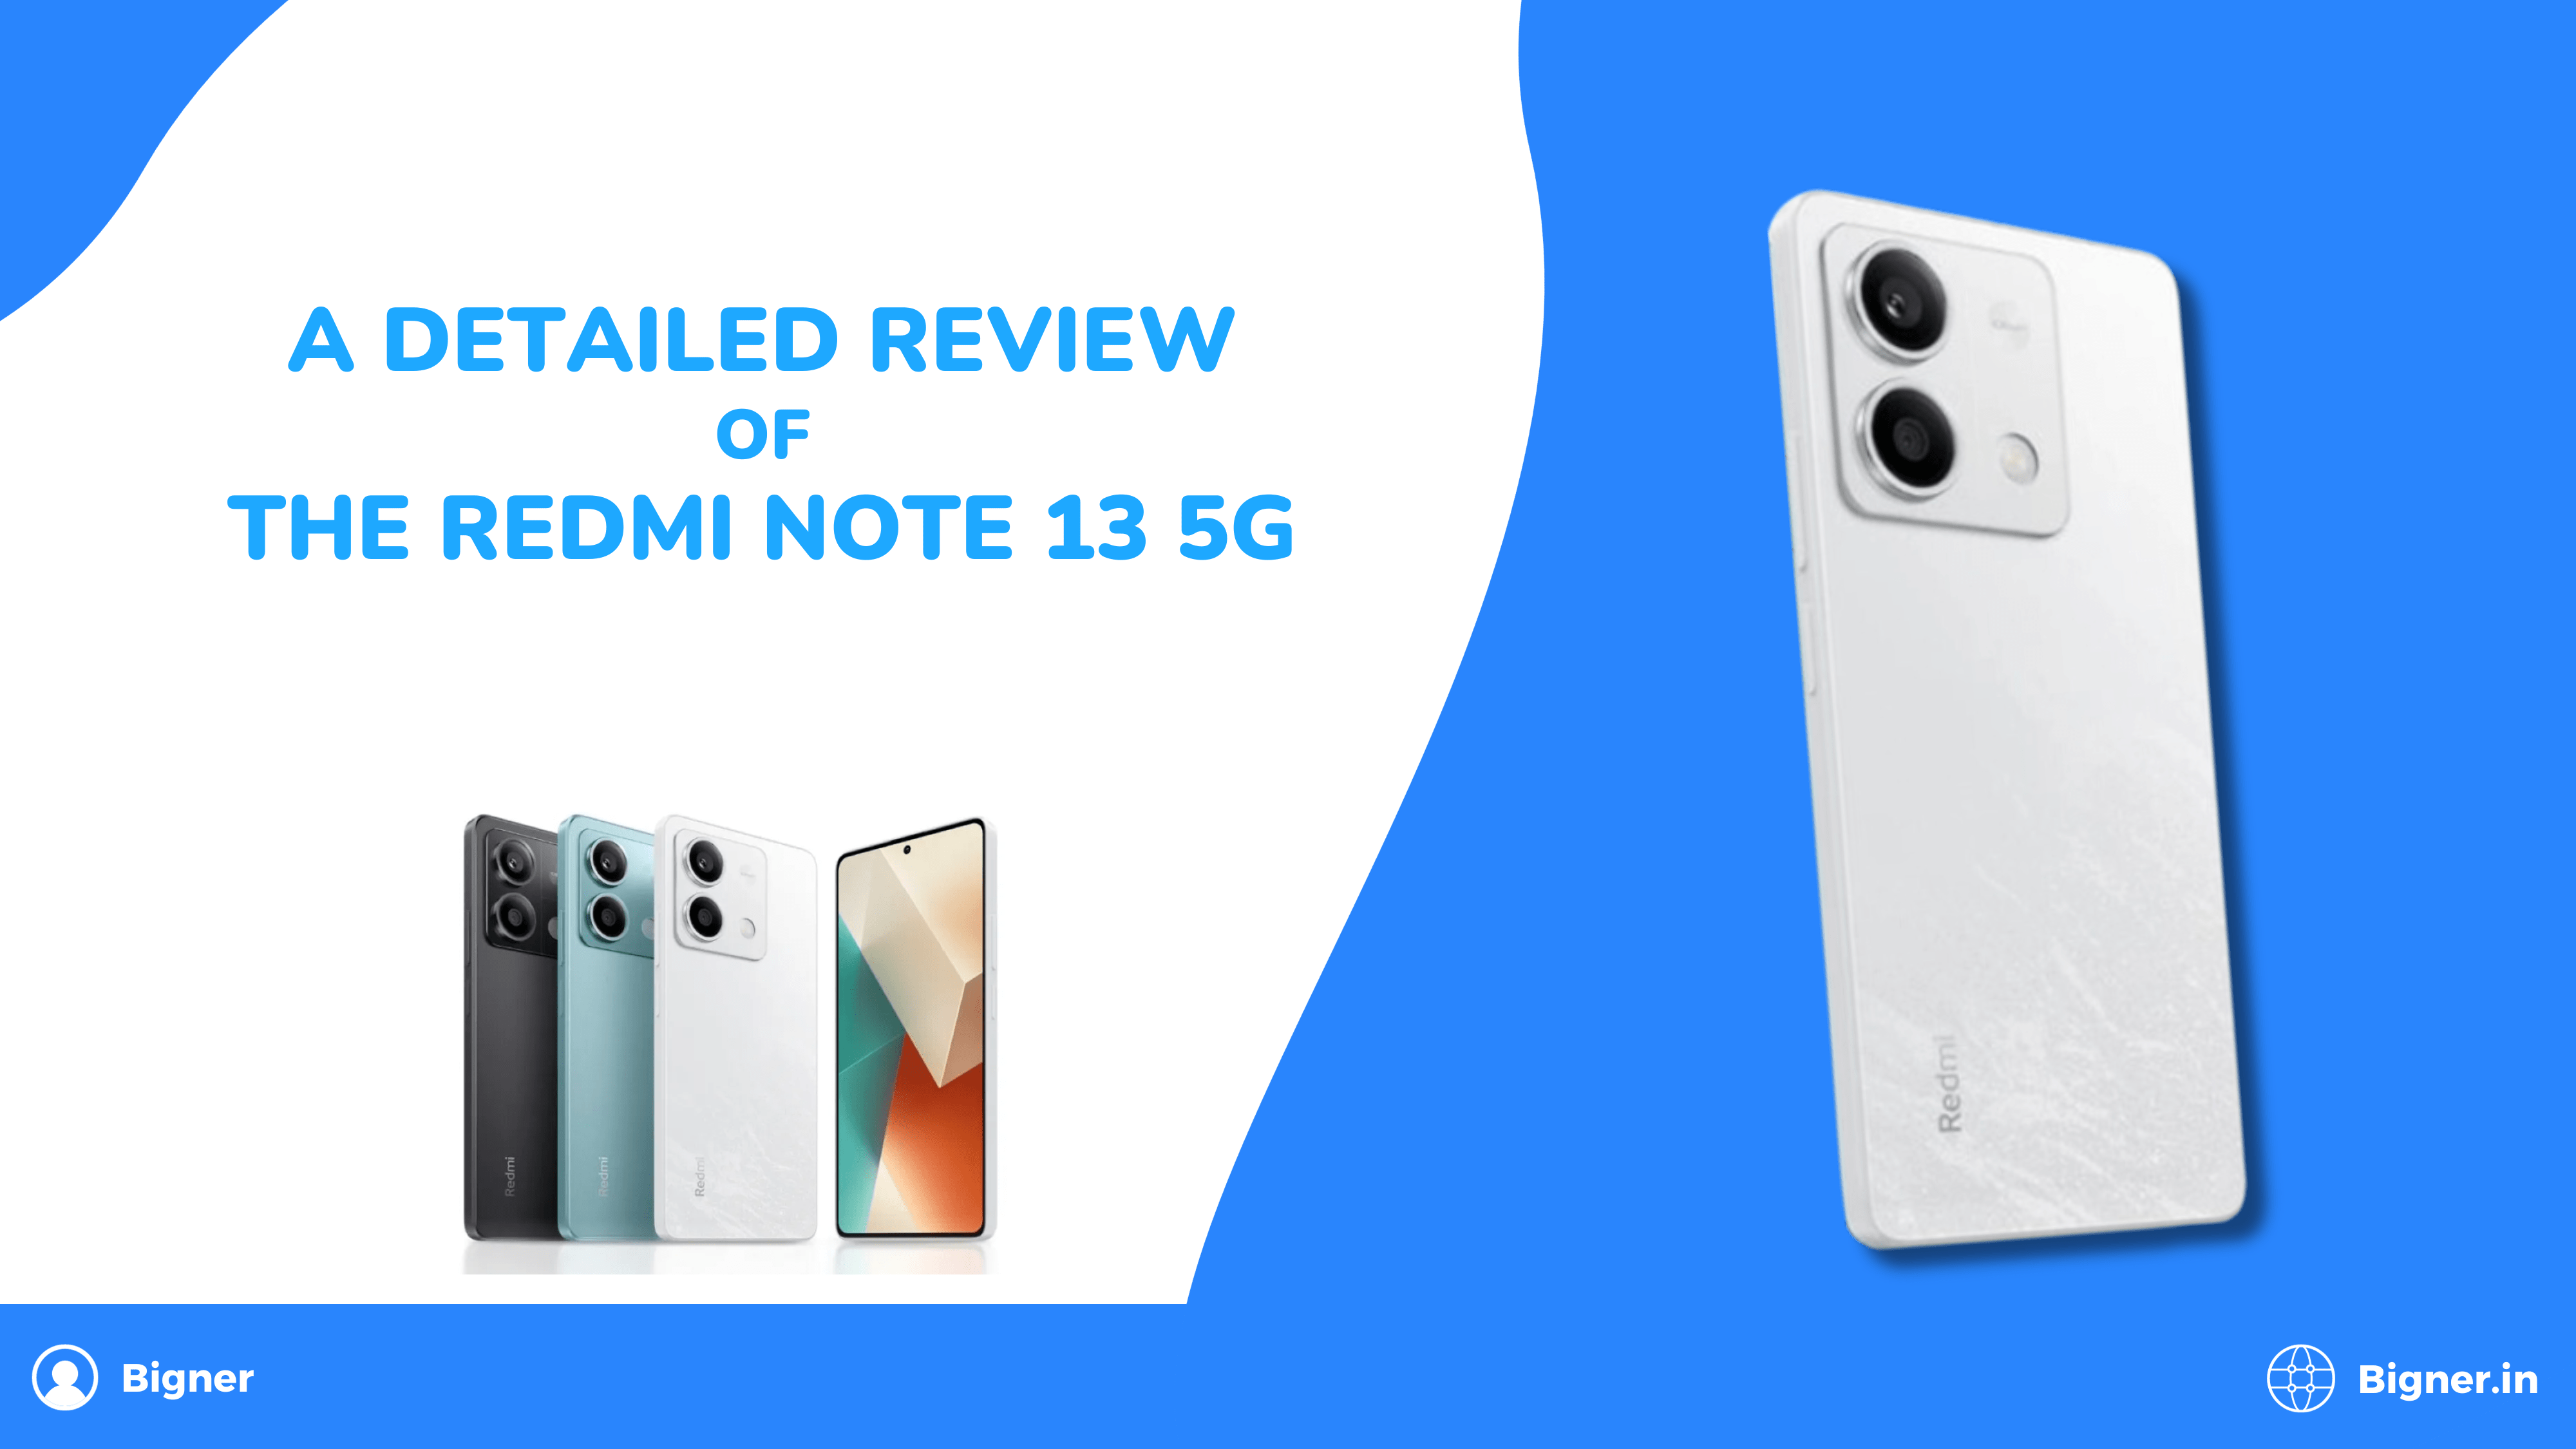 A Detailed Review of the Redmi Note 13 5G